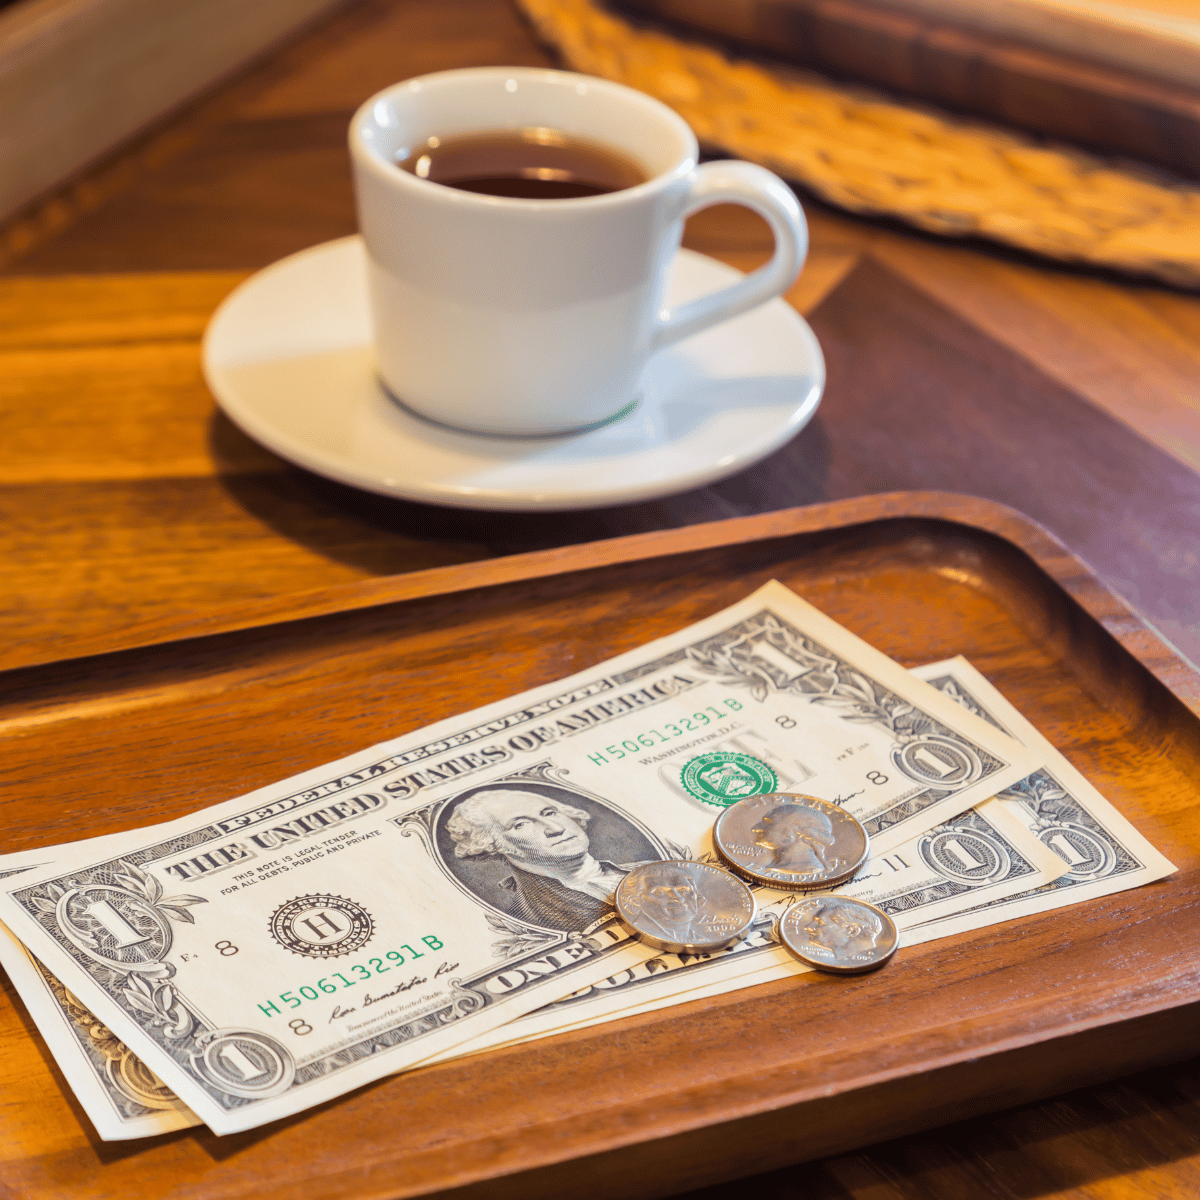 Leaving a tip - With prepaid gratuities, you don't have to